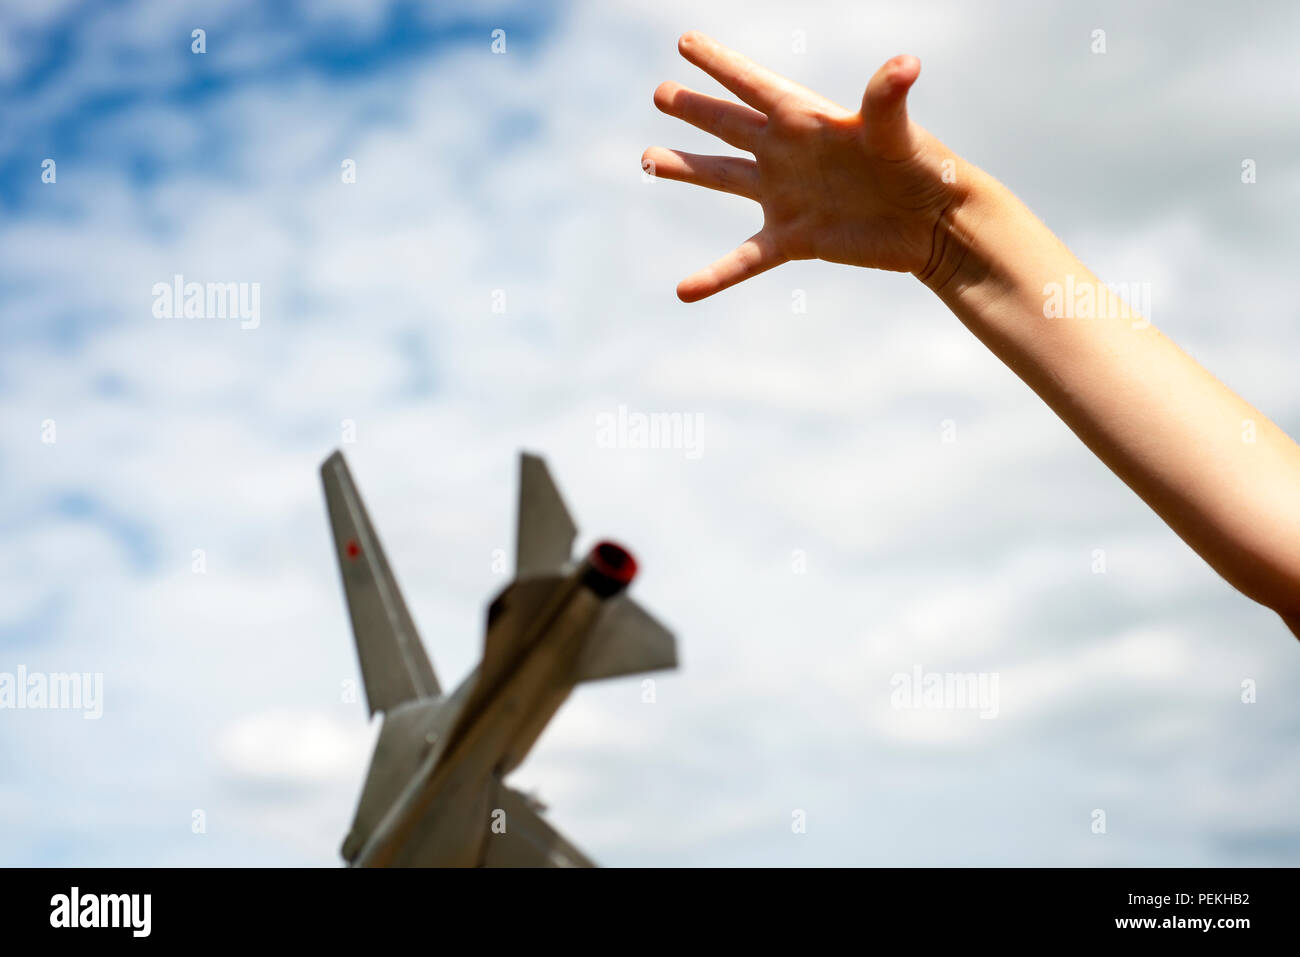 Childs hand dropping a scale model of a Russian Mig-23 fighter jet Stock Photo